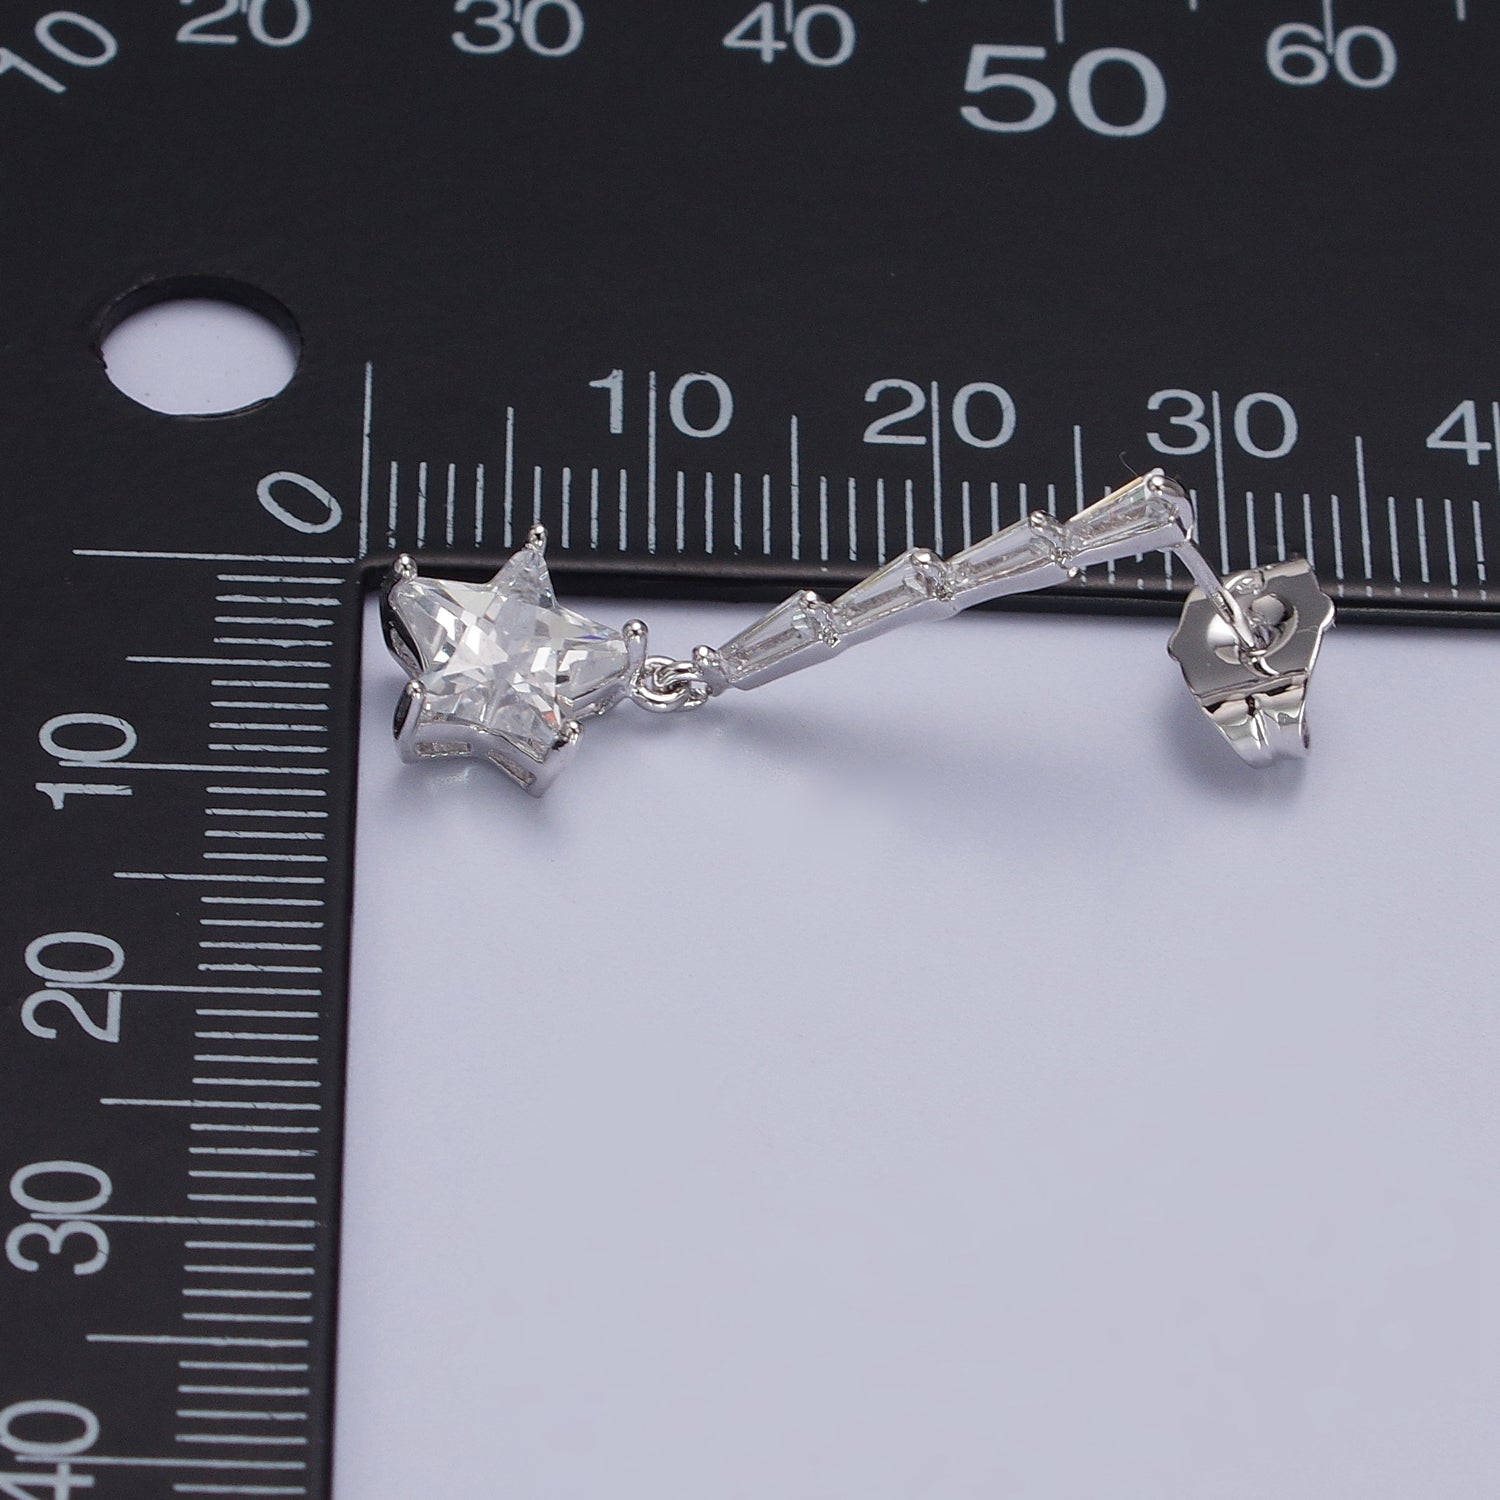 Long Silver Baguette Stone with CZ Star Earring Stud Celestial Jewelry AB1036 - DLUXCA